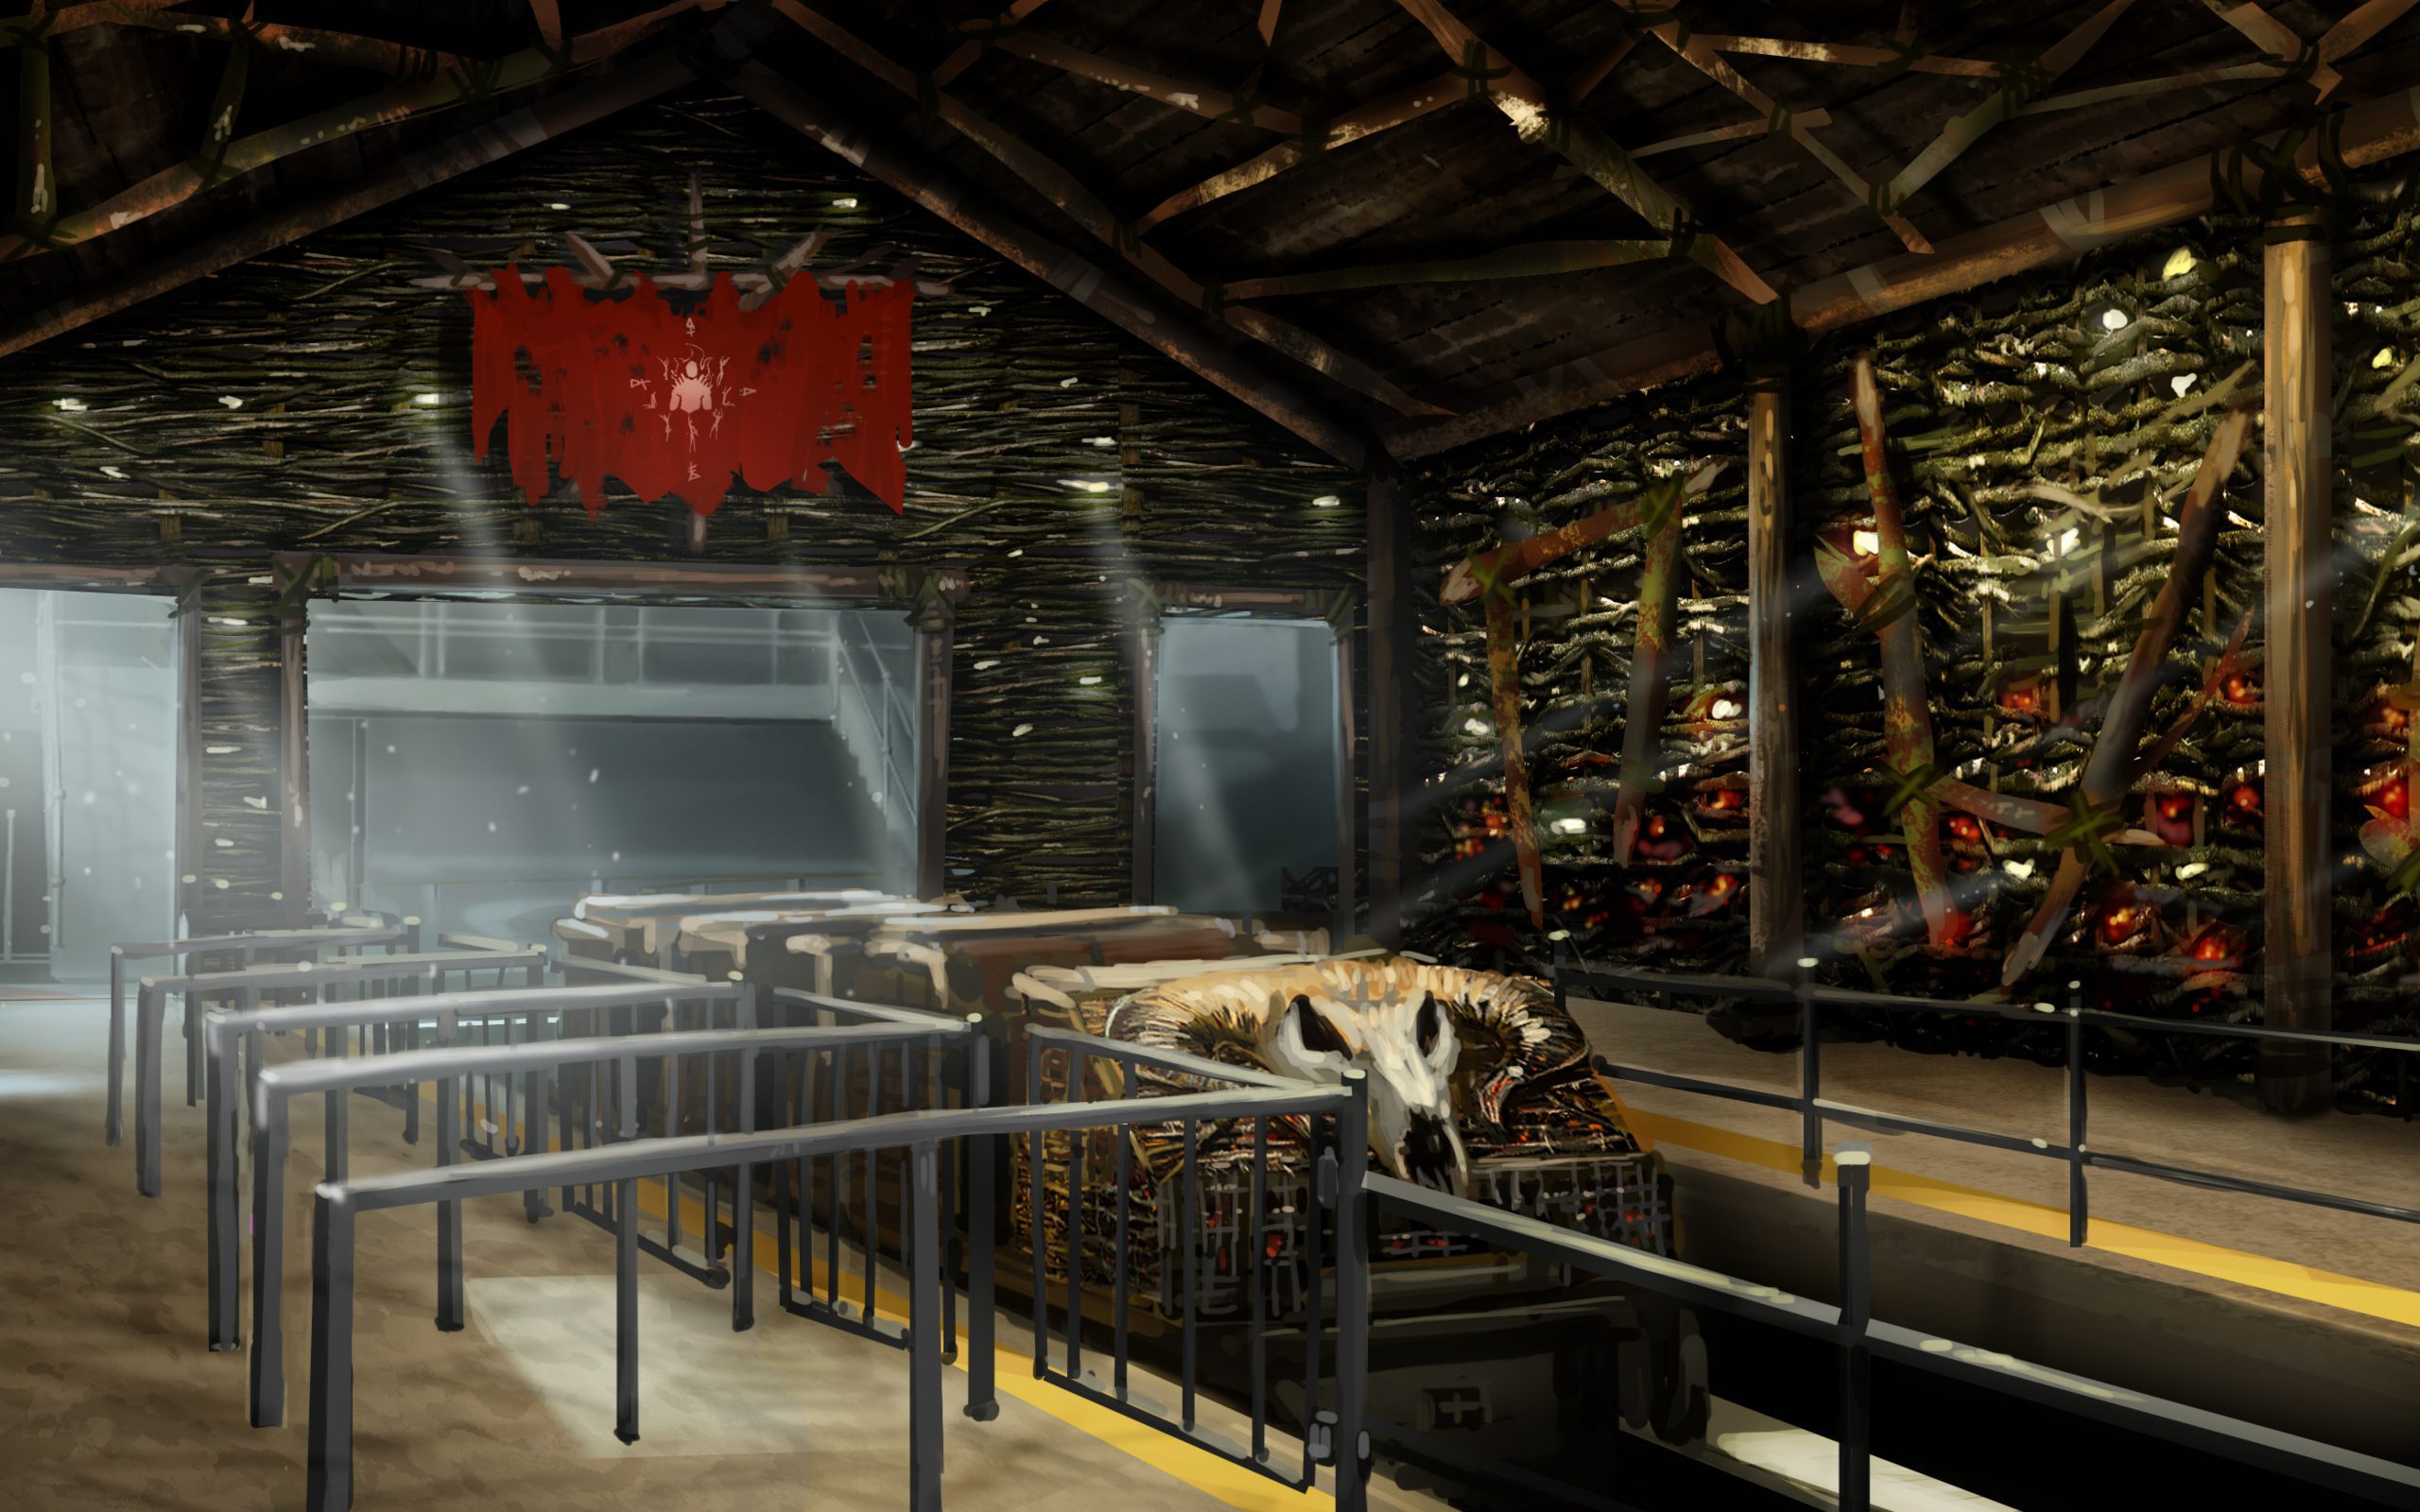 Concept image for a wood and fire based ride station